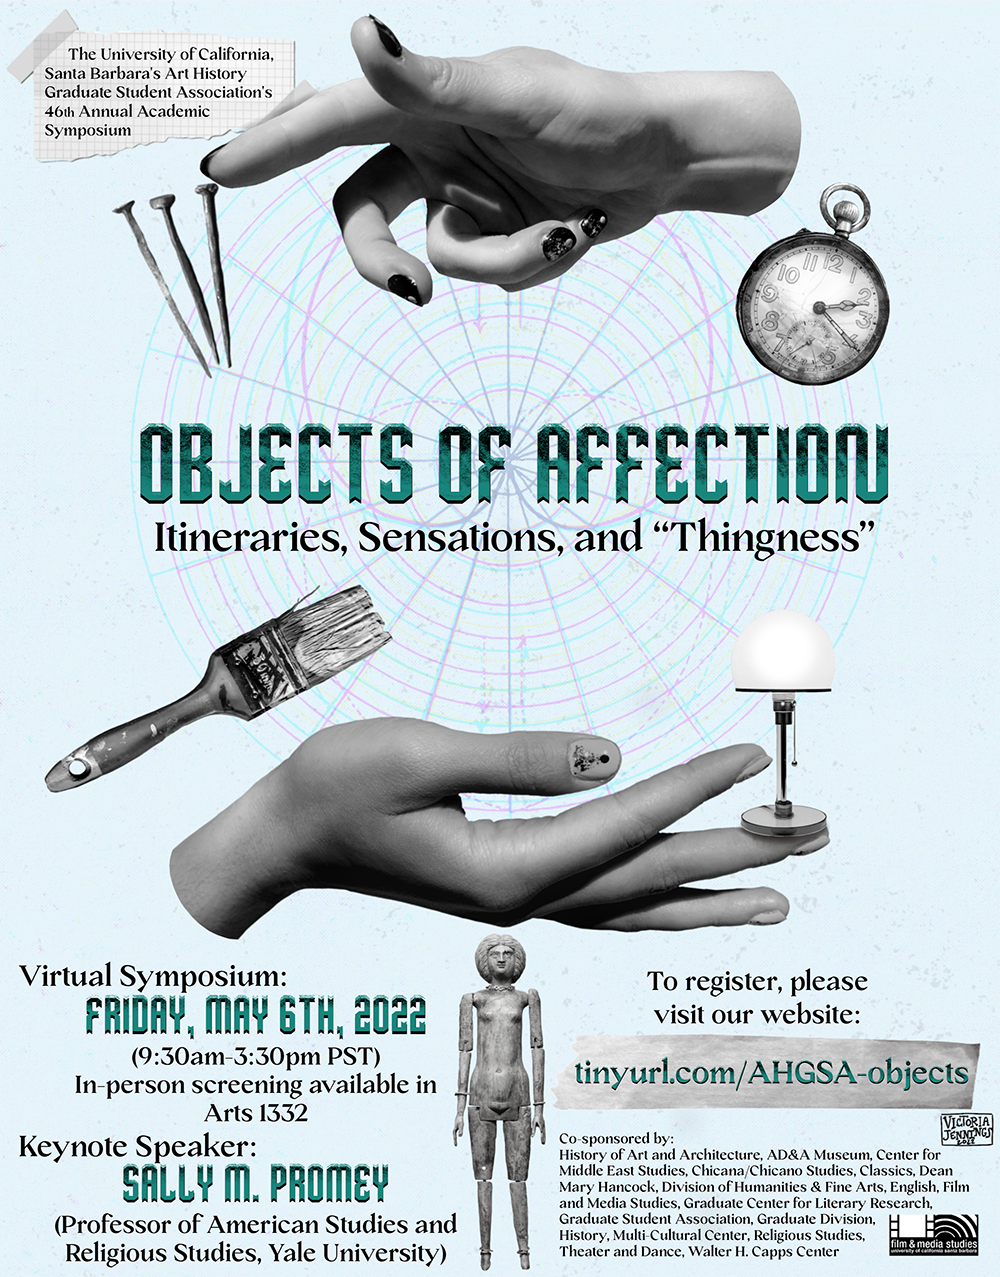 UCSB AHGSA 46th Annual Graduate Student Symposium - Objects of Affection: Itineraries, Sensations, and “Thingness” poster